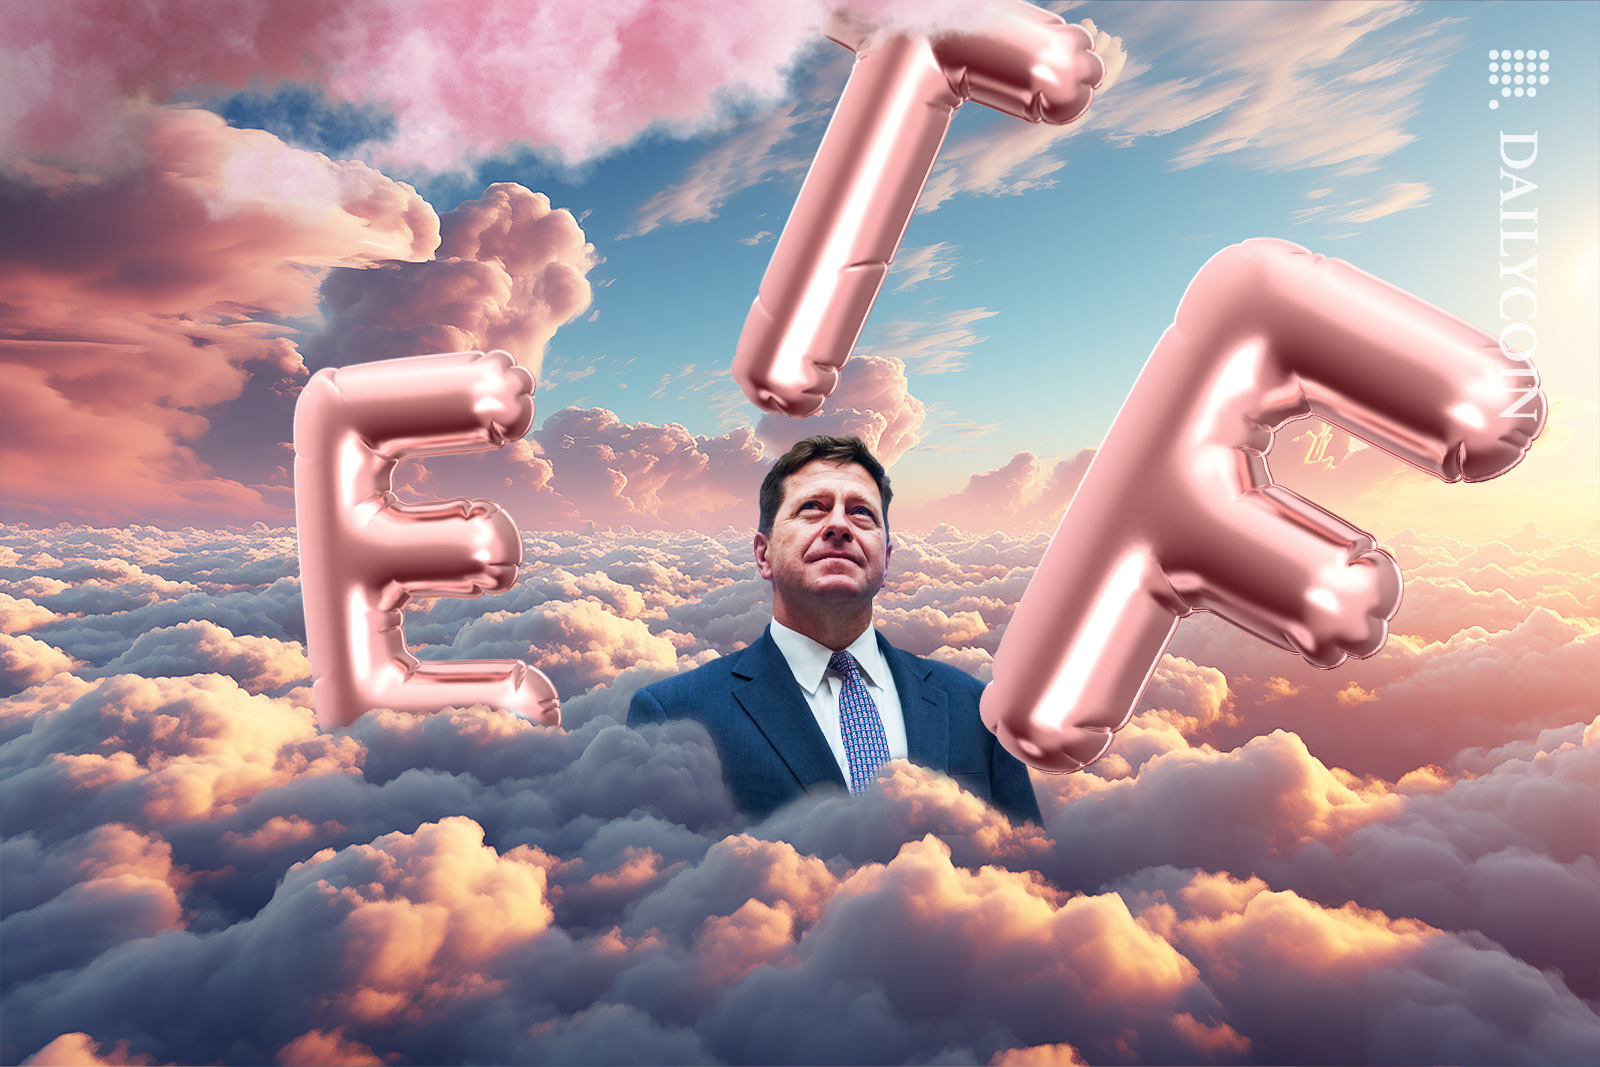 SEC Chair Jay Clayton head up in the clouds seeing ETF balloons